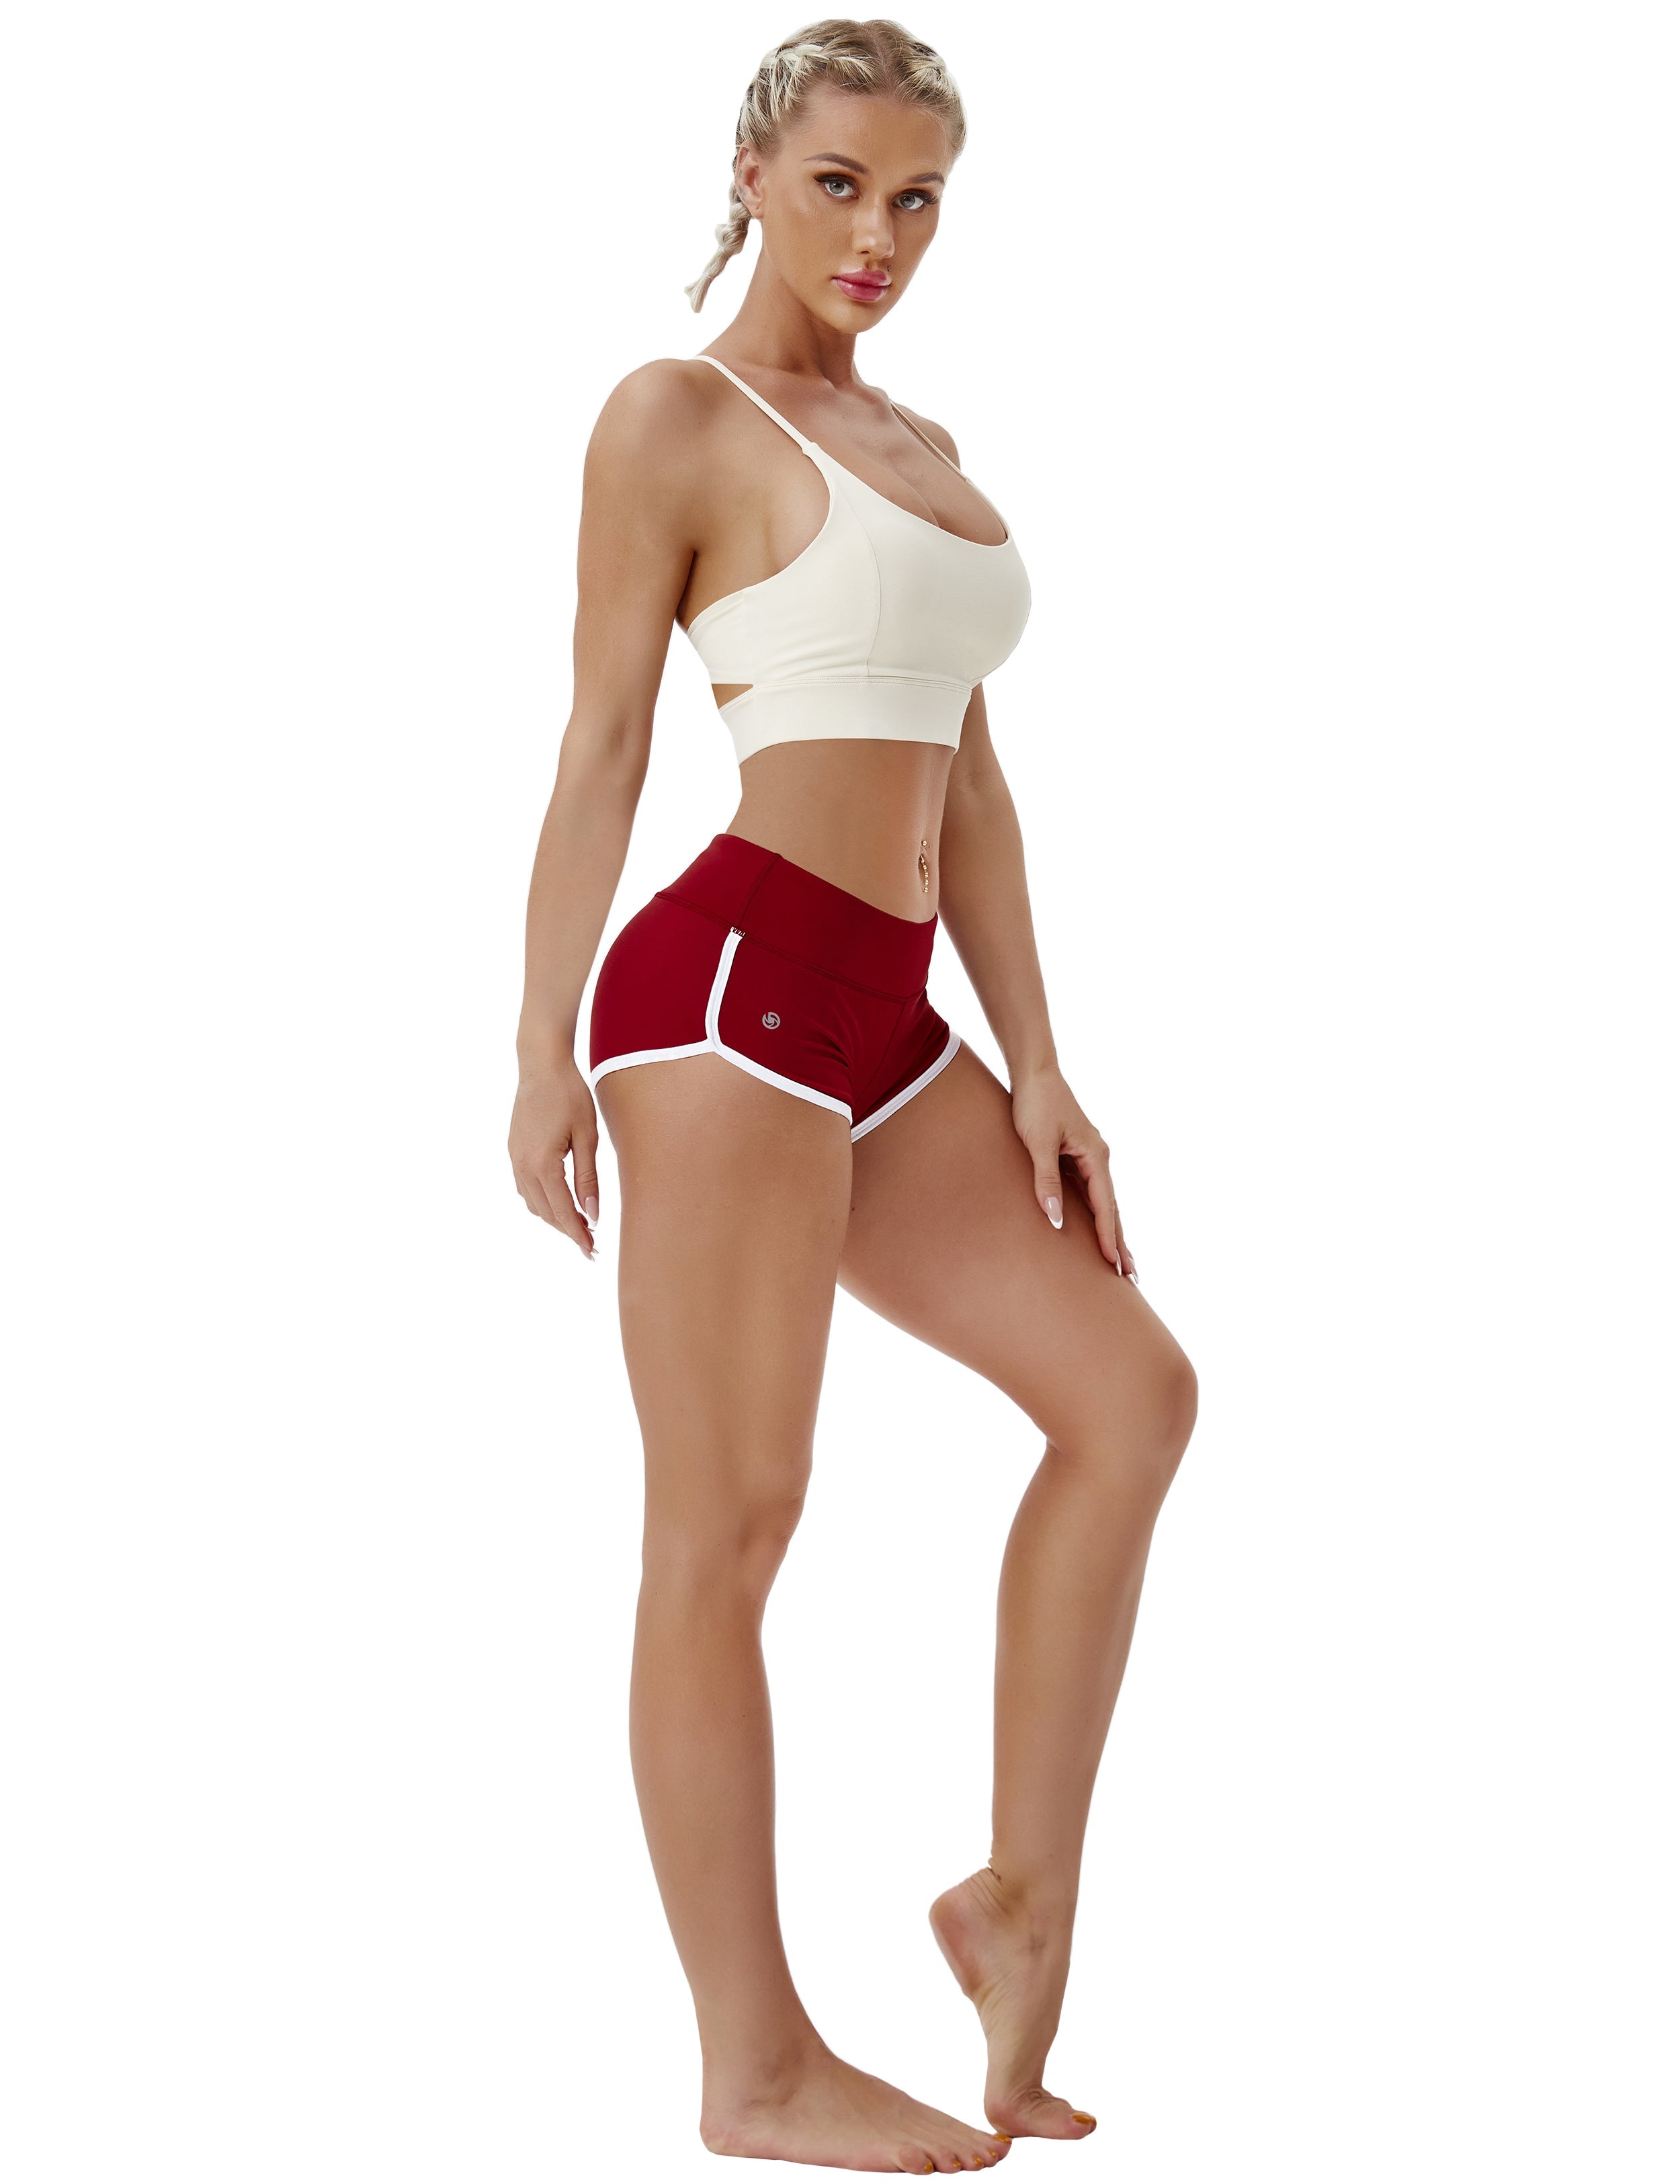 Sexy Booty Biking Shorts cherryred Sleek, soft, smooth and totally comfortable: our newest sexy style is here. Softest-ever fabric High elasticity High density 4-way stretch Fabric doesn't attract lint easily No see-through Moisture-wicking Machine wash 75%Nylon/25%Spandex